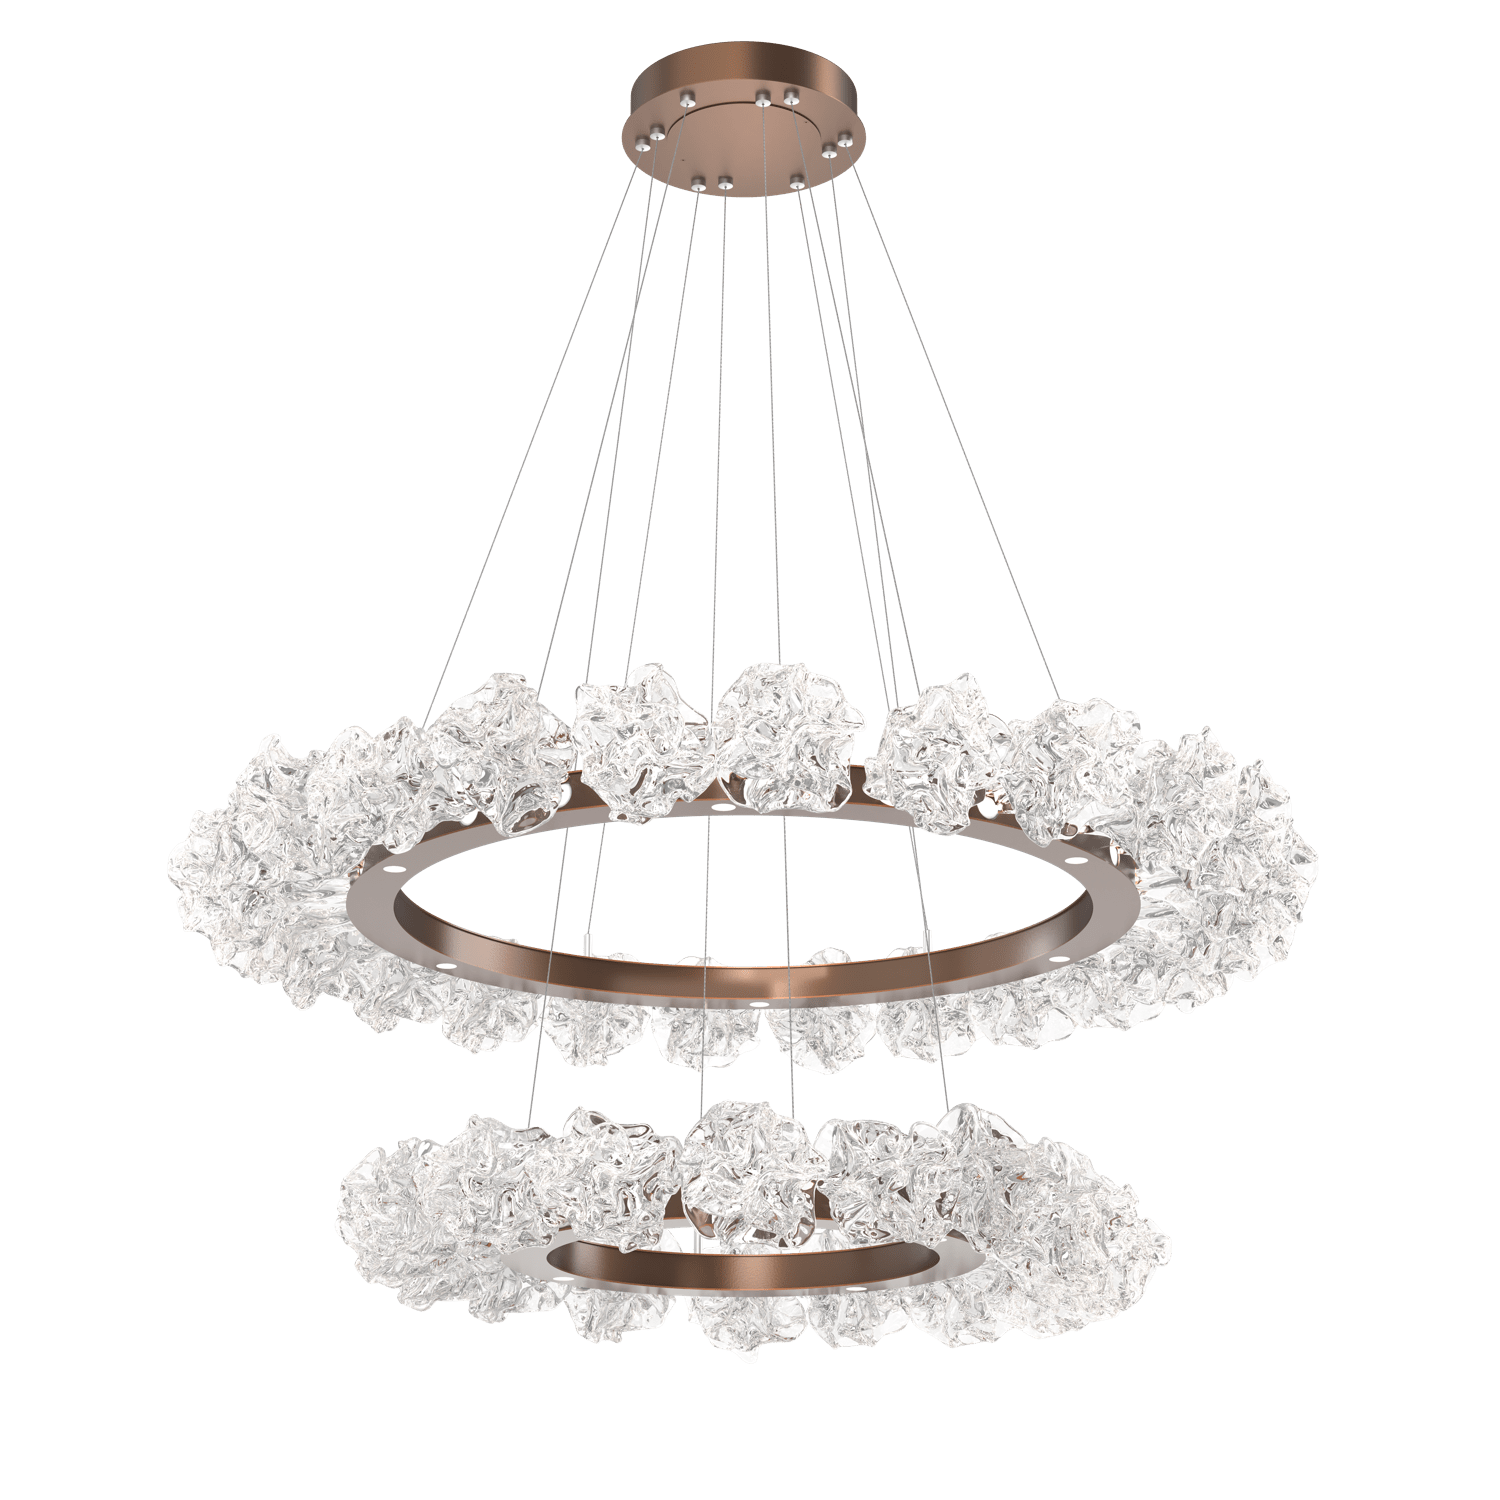 CHB0059-2B-BB-Hammerton-Studio-Blossom-50-inch-two-tier-radial-ring-chandelier-with-burnished-bronze-finish-and-clear-handblown-crystal-glass-shades-and-LED-lamping